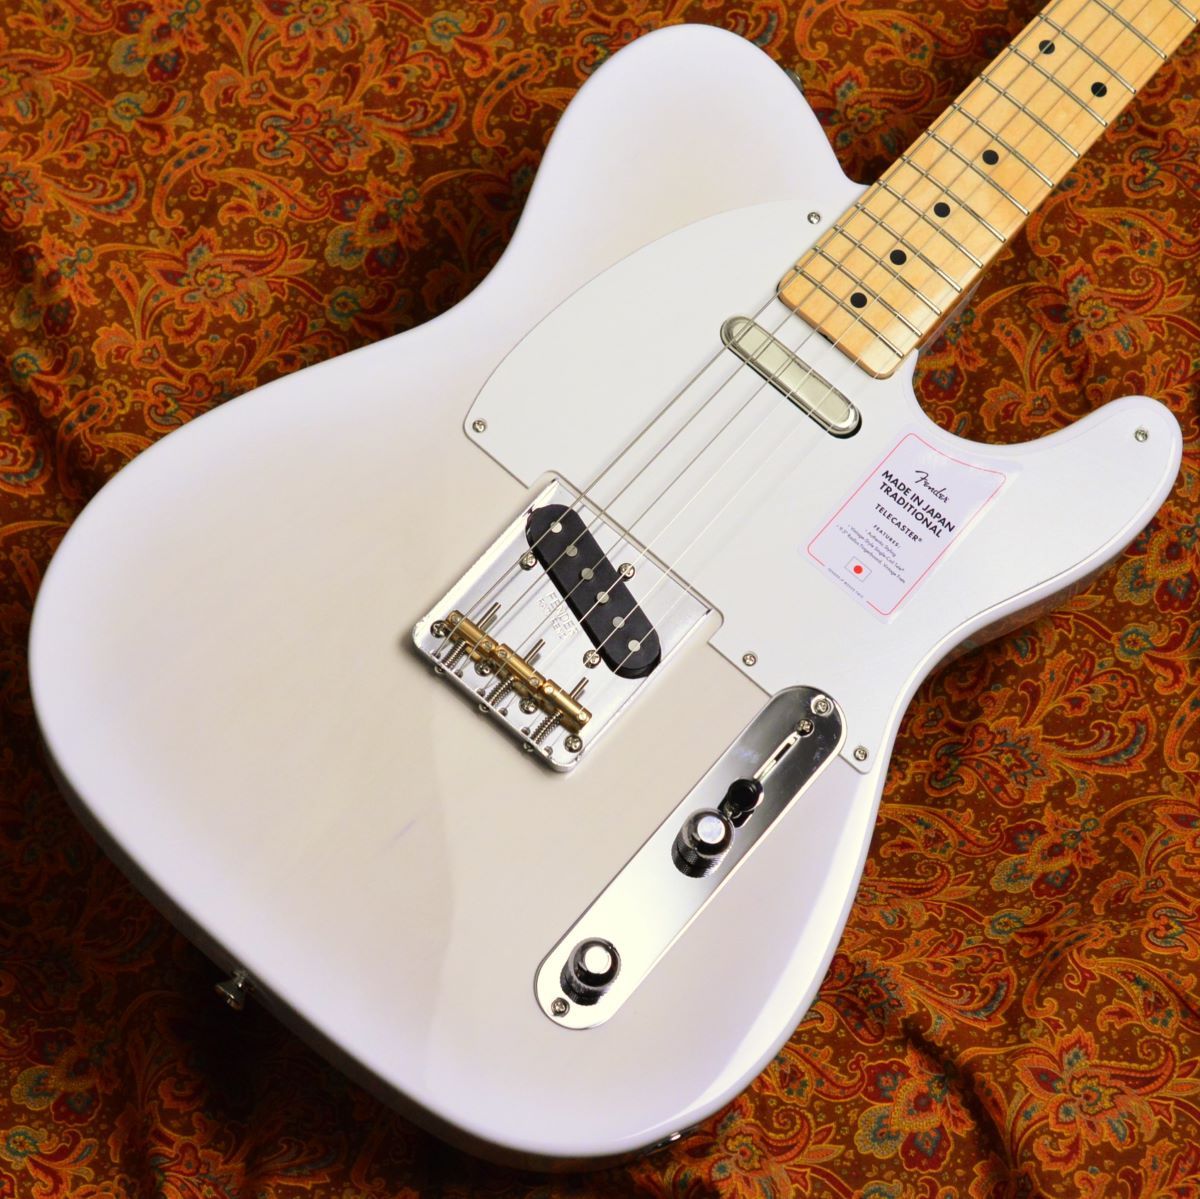 Fender Made in Japan Traditional 50s Telecaster / White Blonde